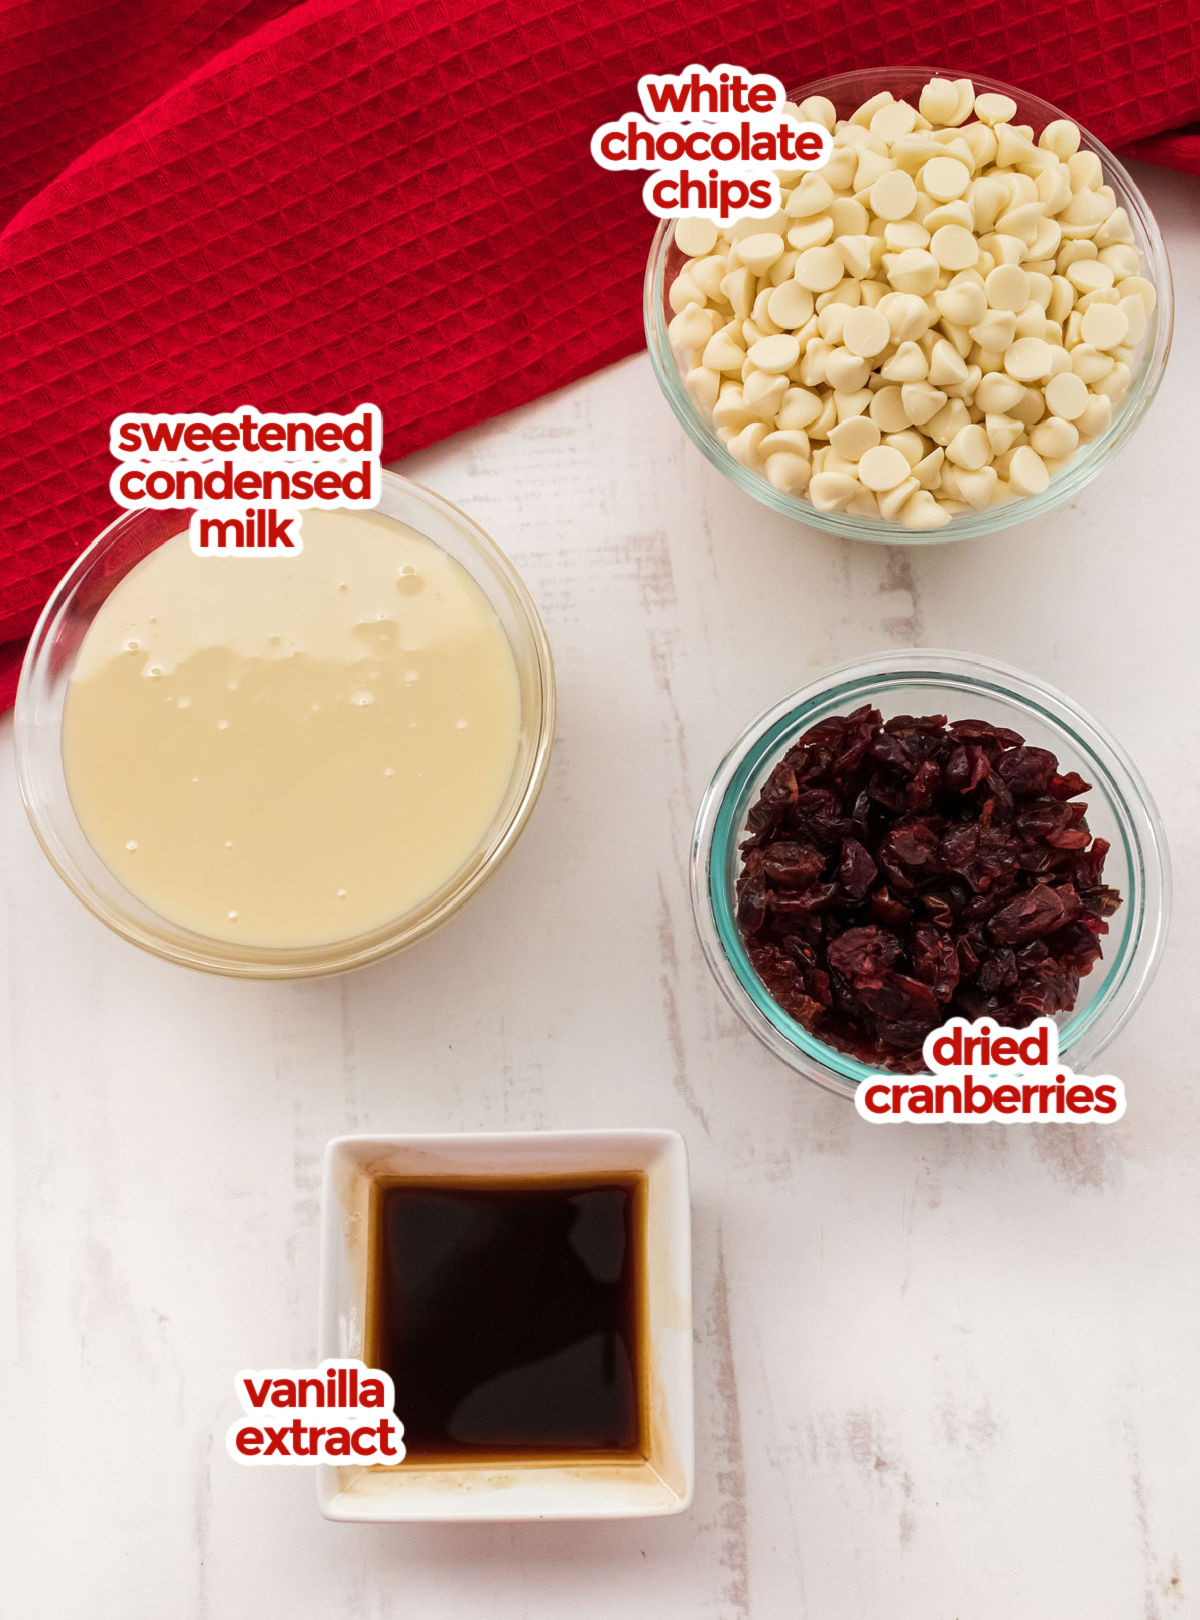 All the ingredients you will need to make White Chocolate Cranberry Fudge including White Chocolate Chips, Sweetened Condensed Milk, Dried Cranberries and Vanilla.